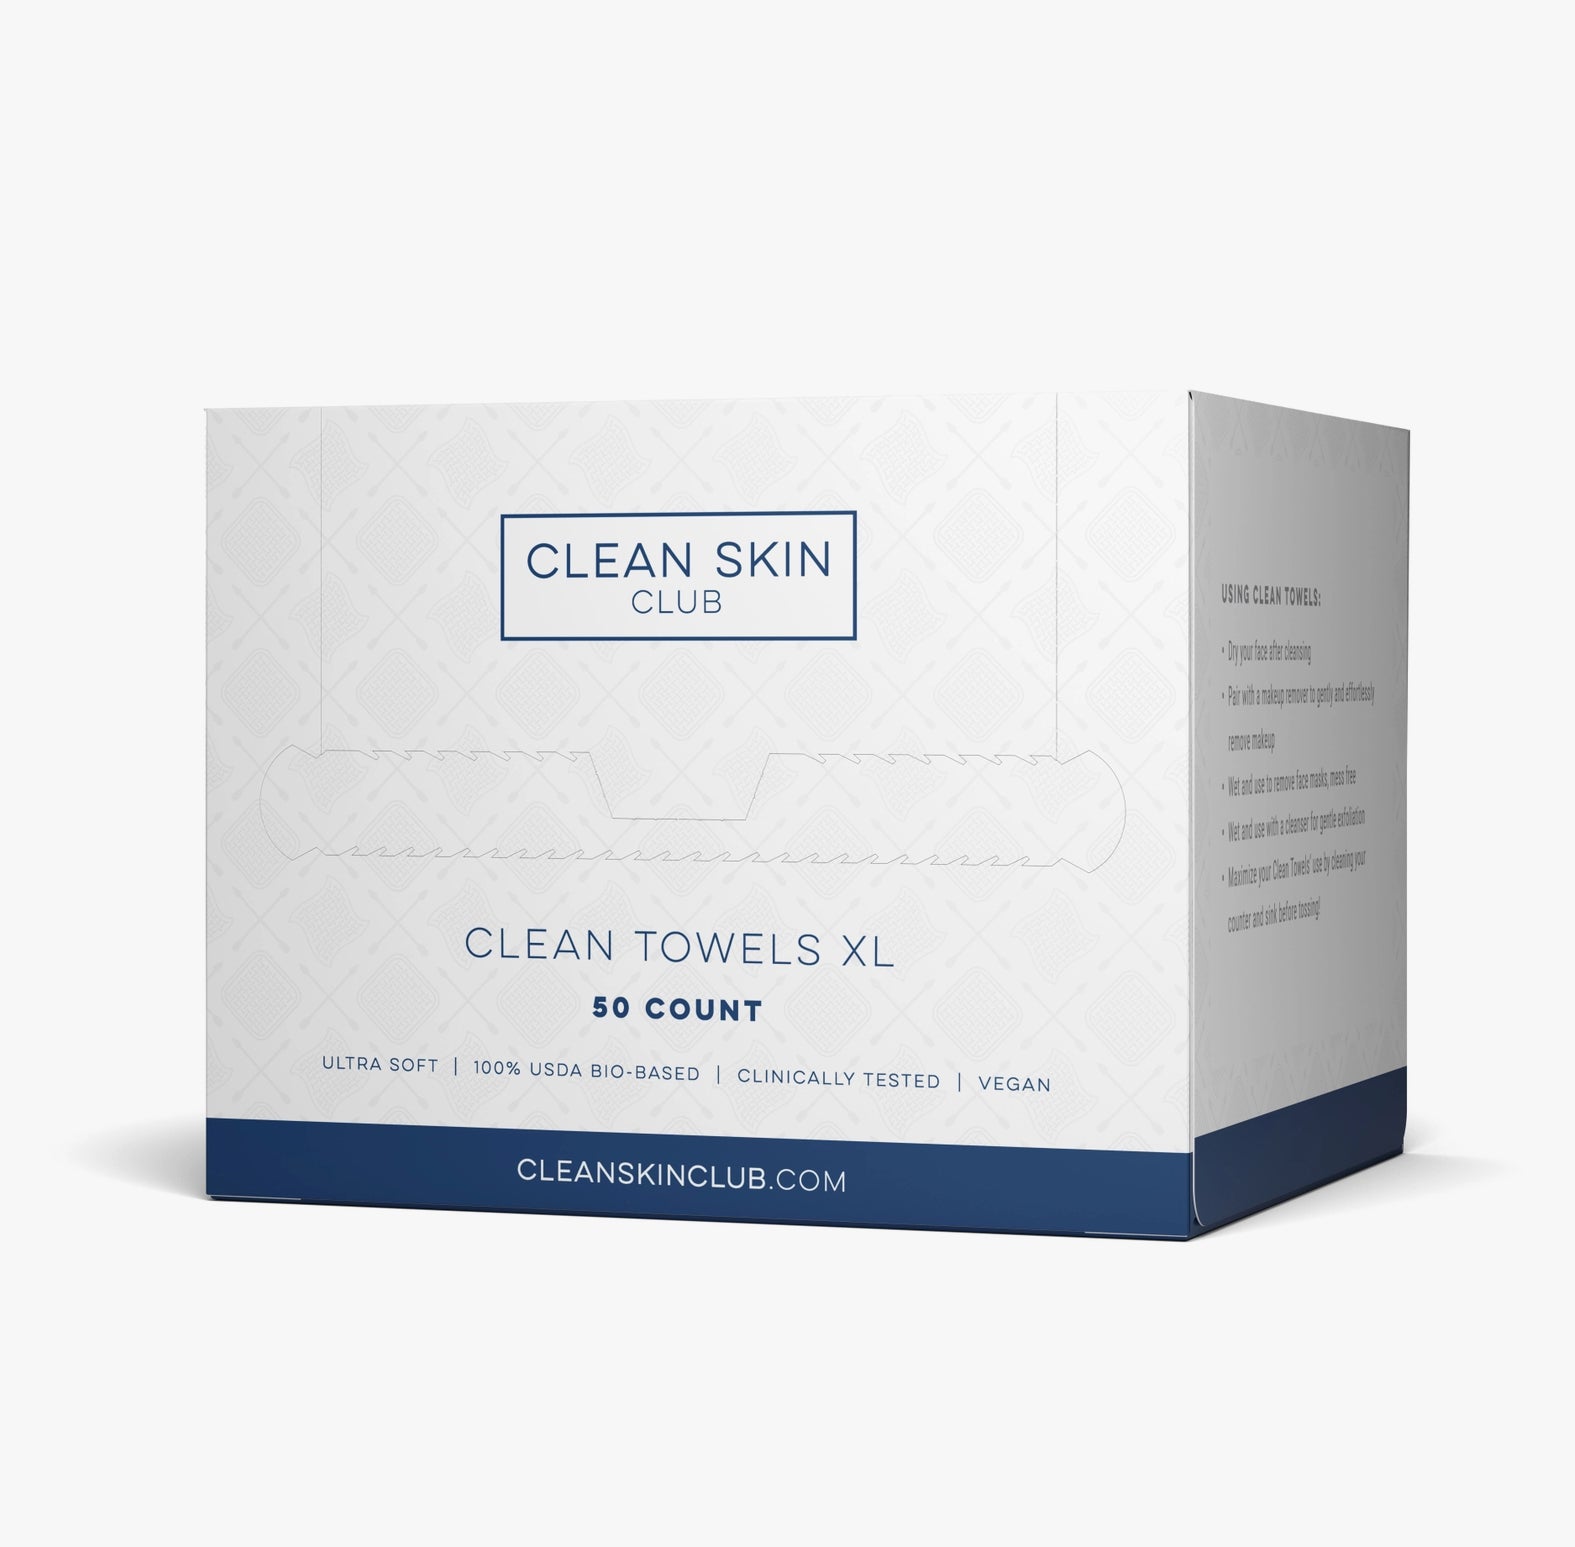 Clean Skin Club Clean Towels XL Supreme - 50 Count - White - 467 requests